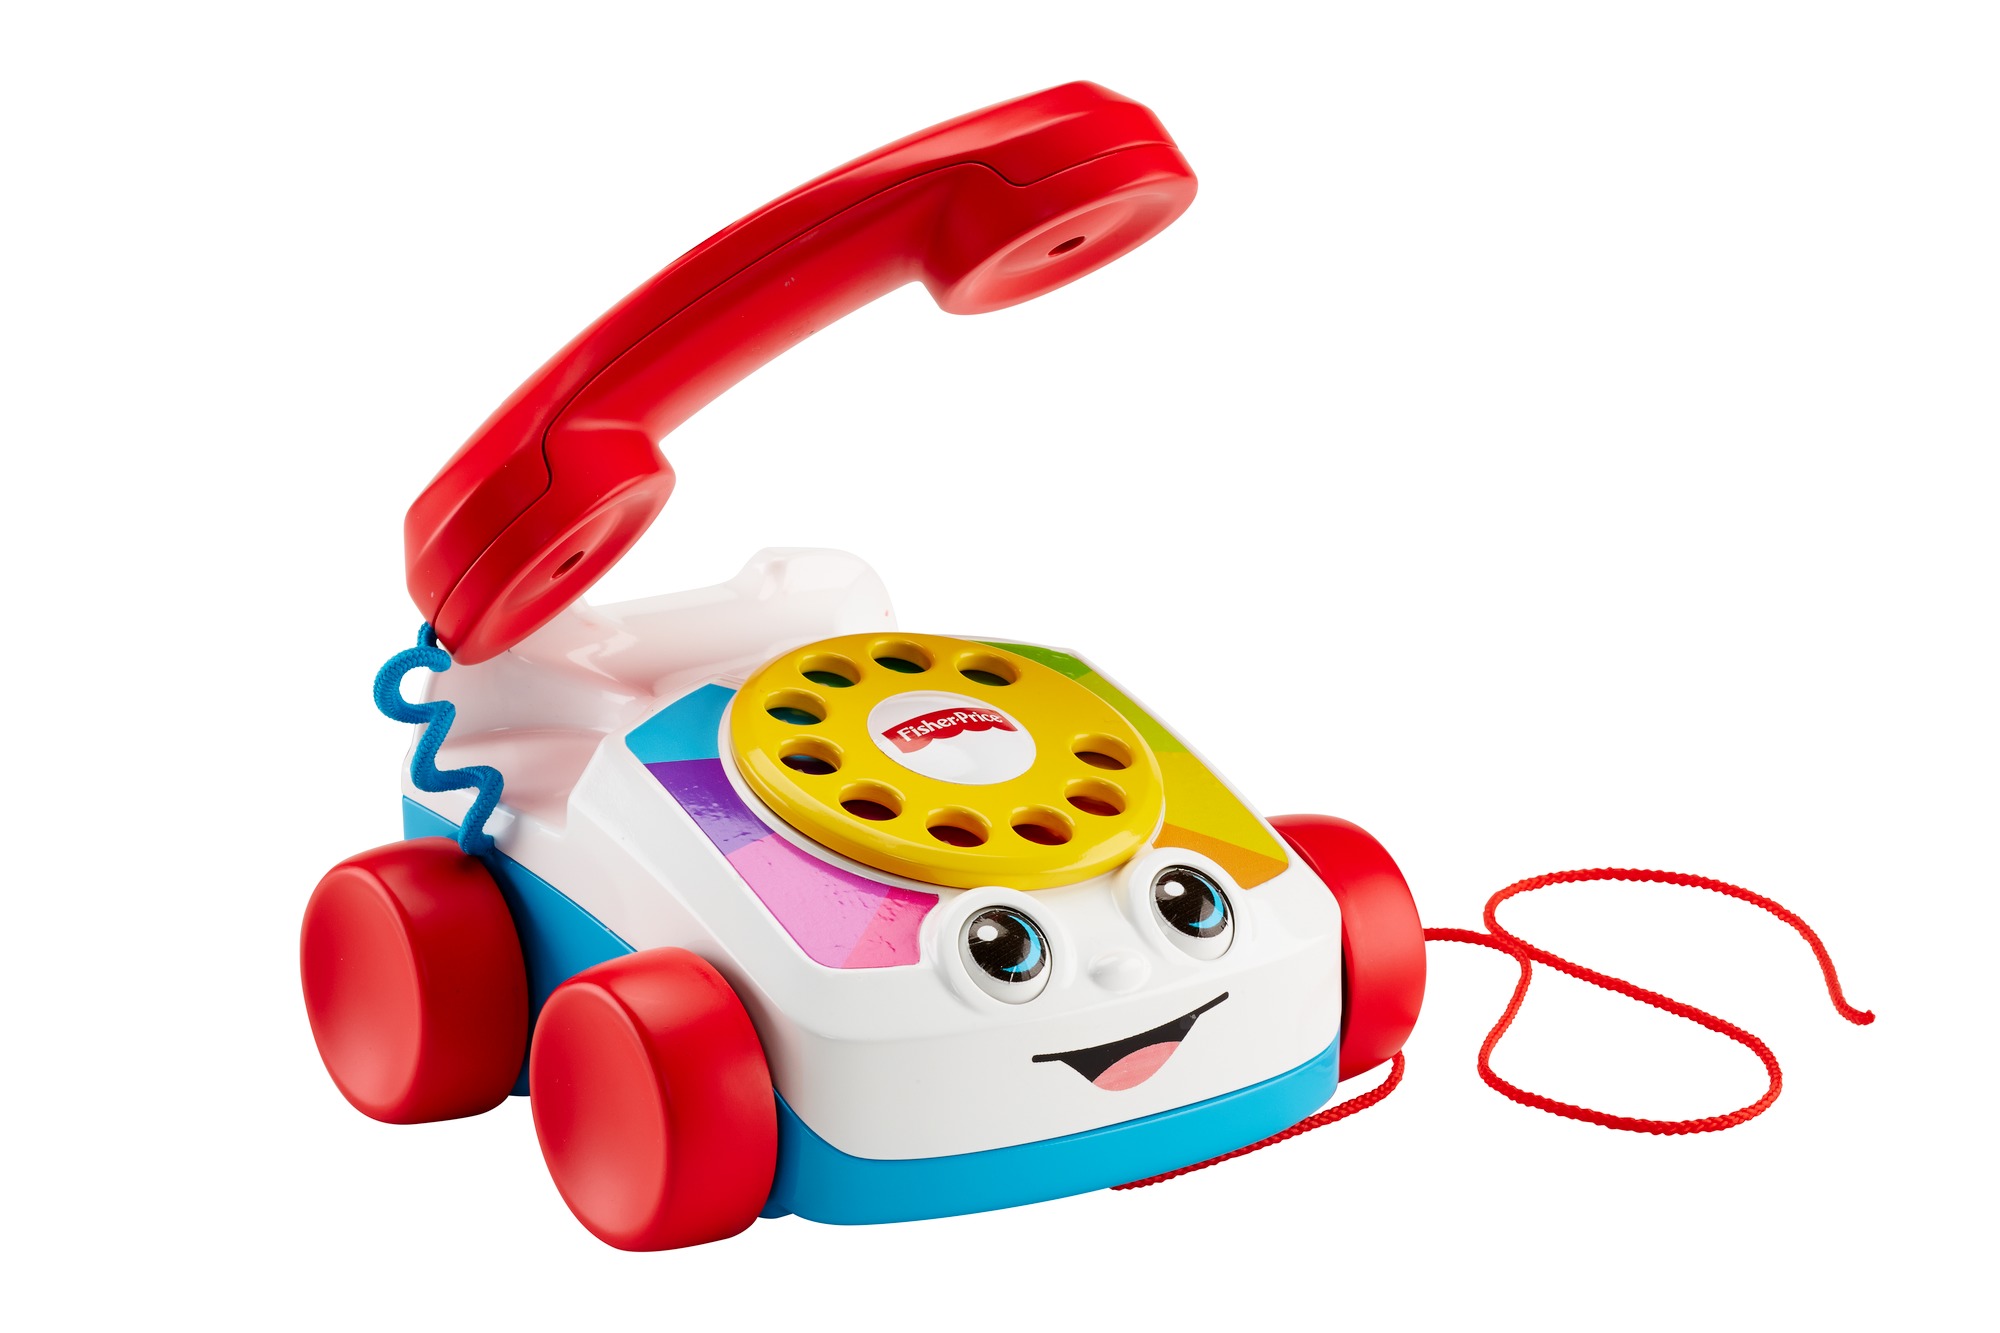 Fisher-Price Chatter Telephone Baby and Toddler Pull Toy Phone with Rotary Dial - image 4 of 6